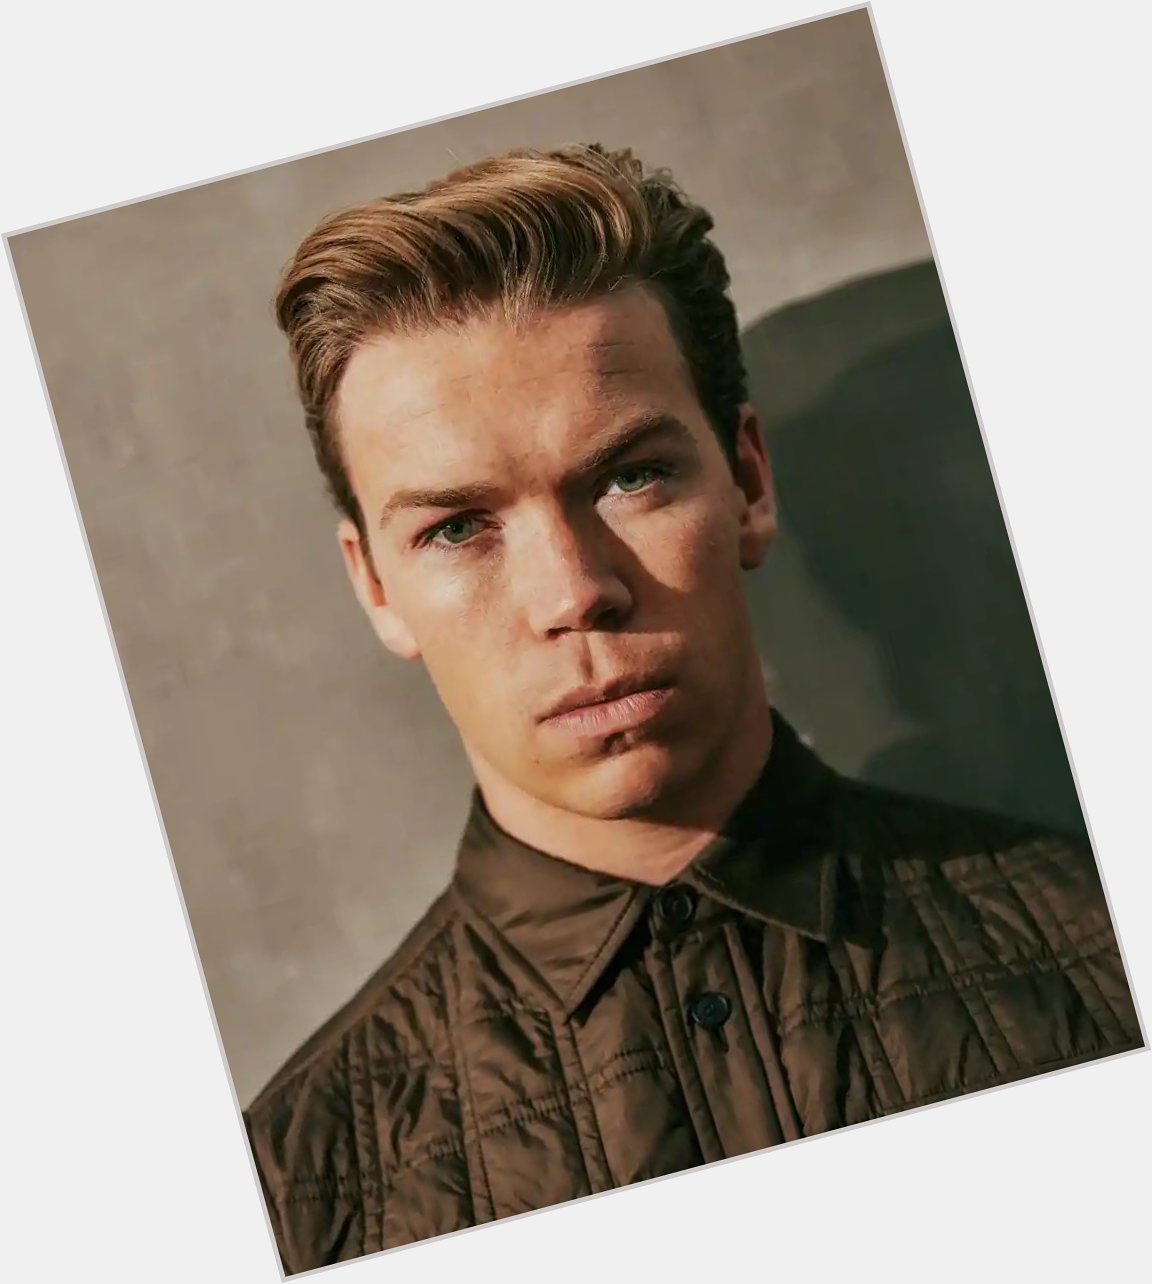 Happy Birthday Will Poulter who turns 29 today. 